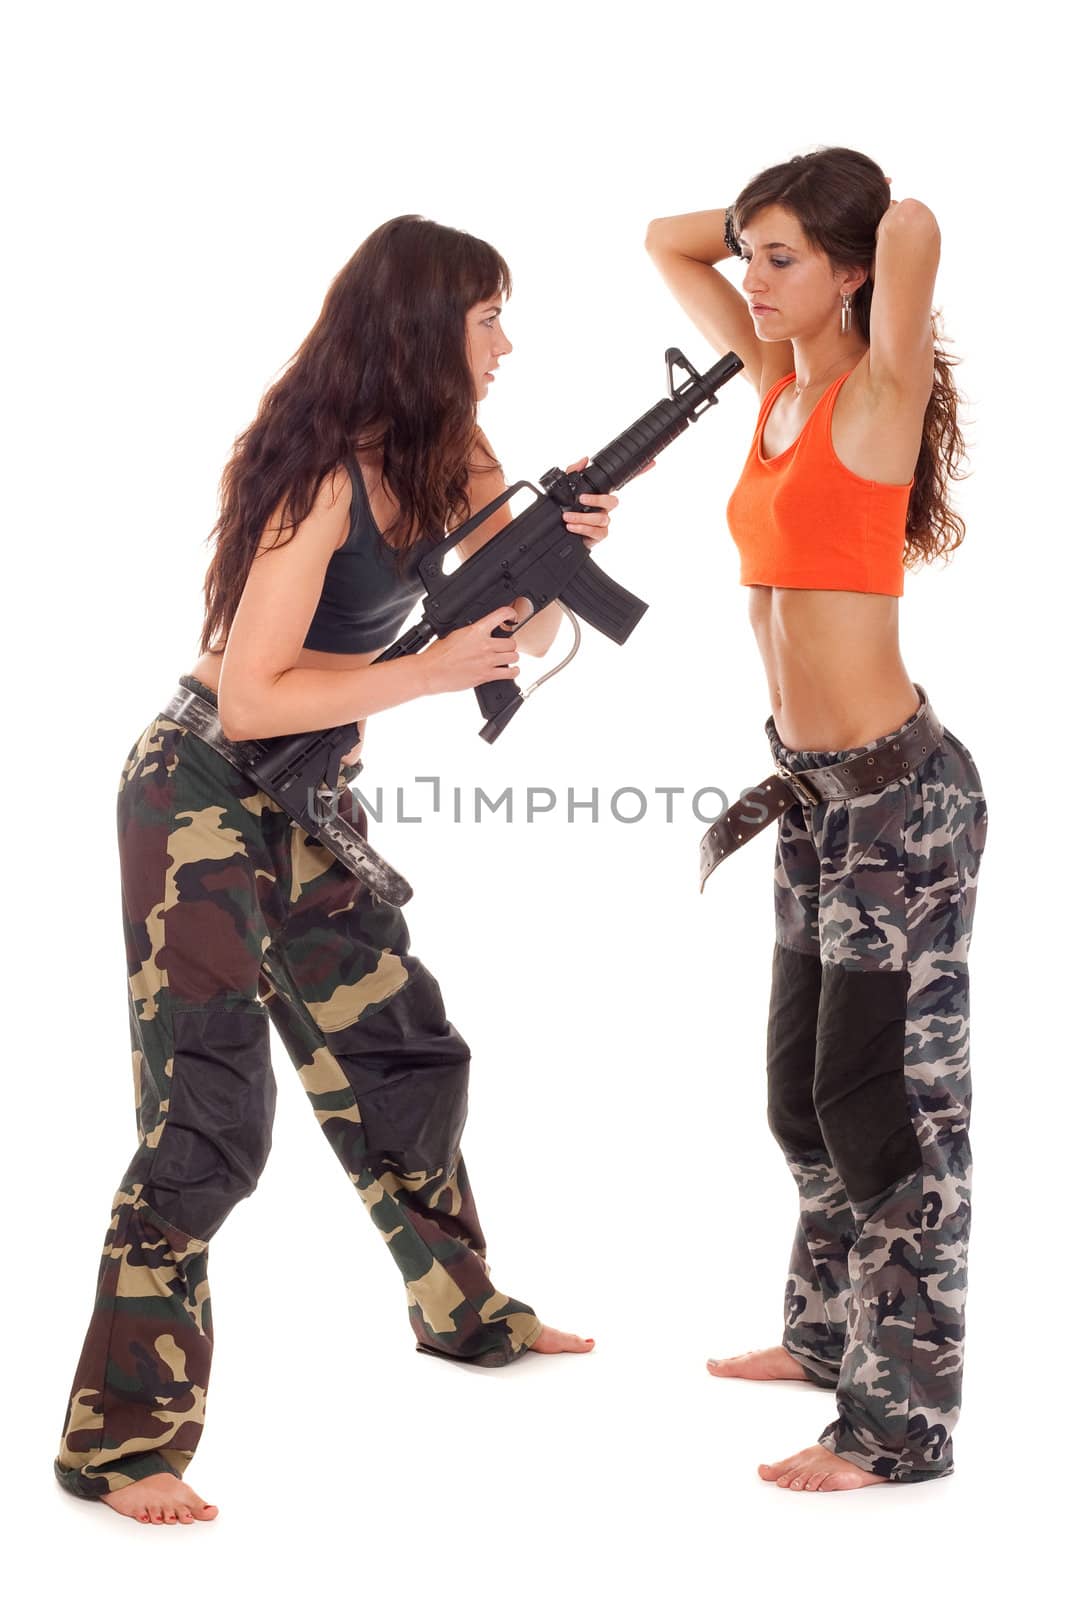 image of two models playing roles of a soldier and captive